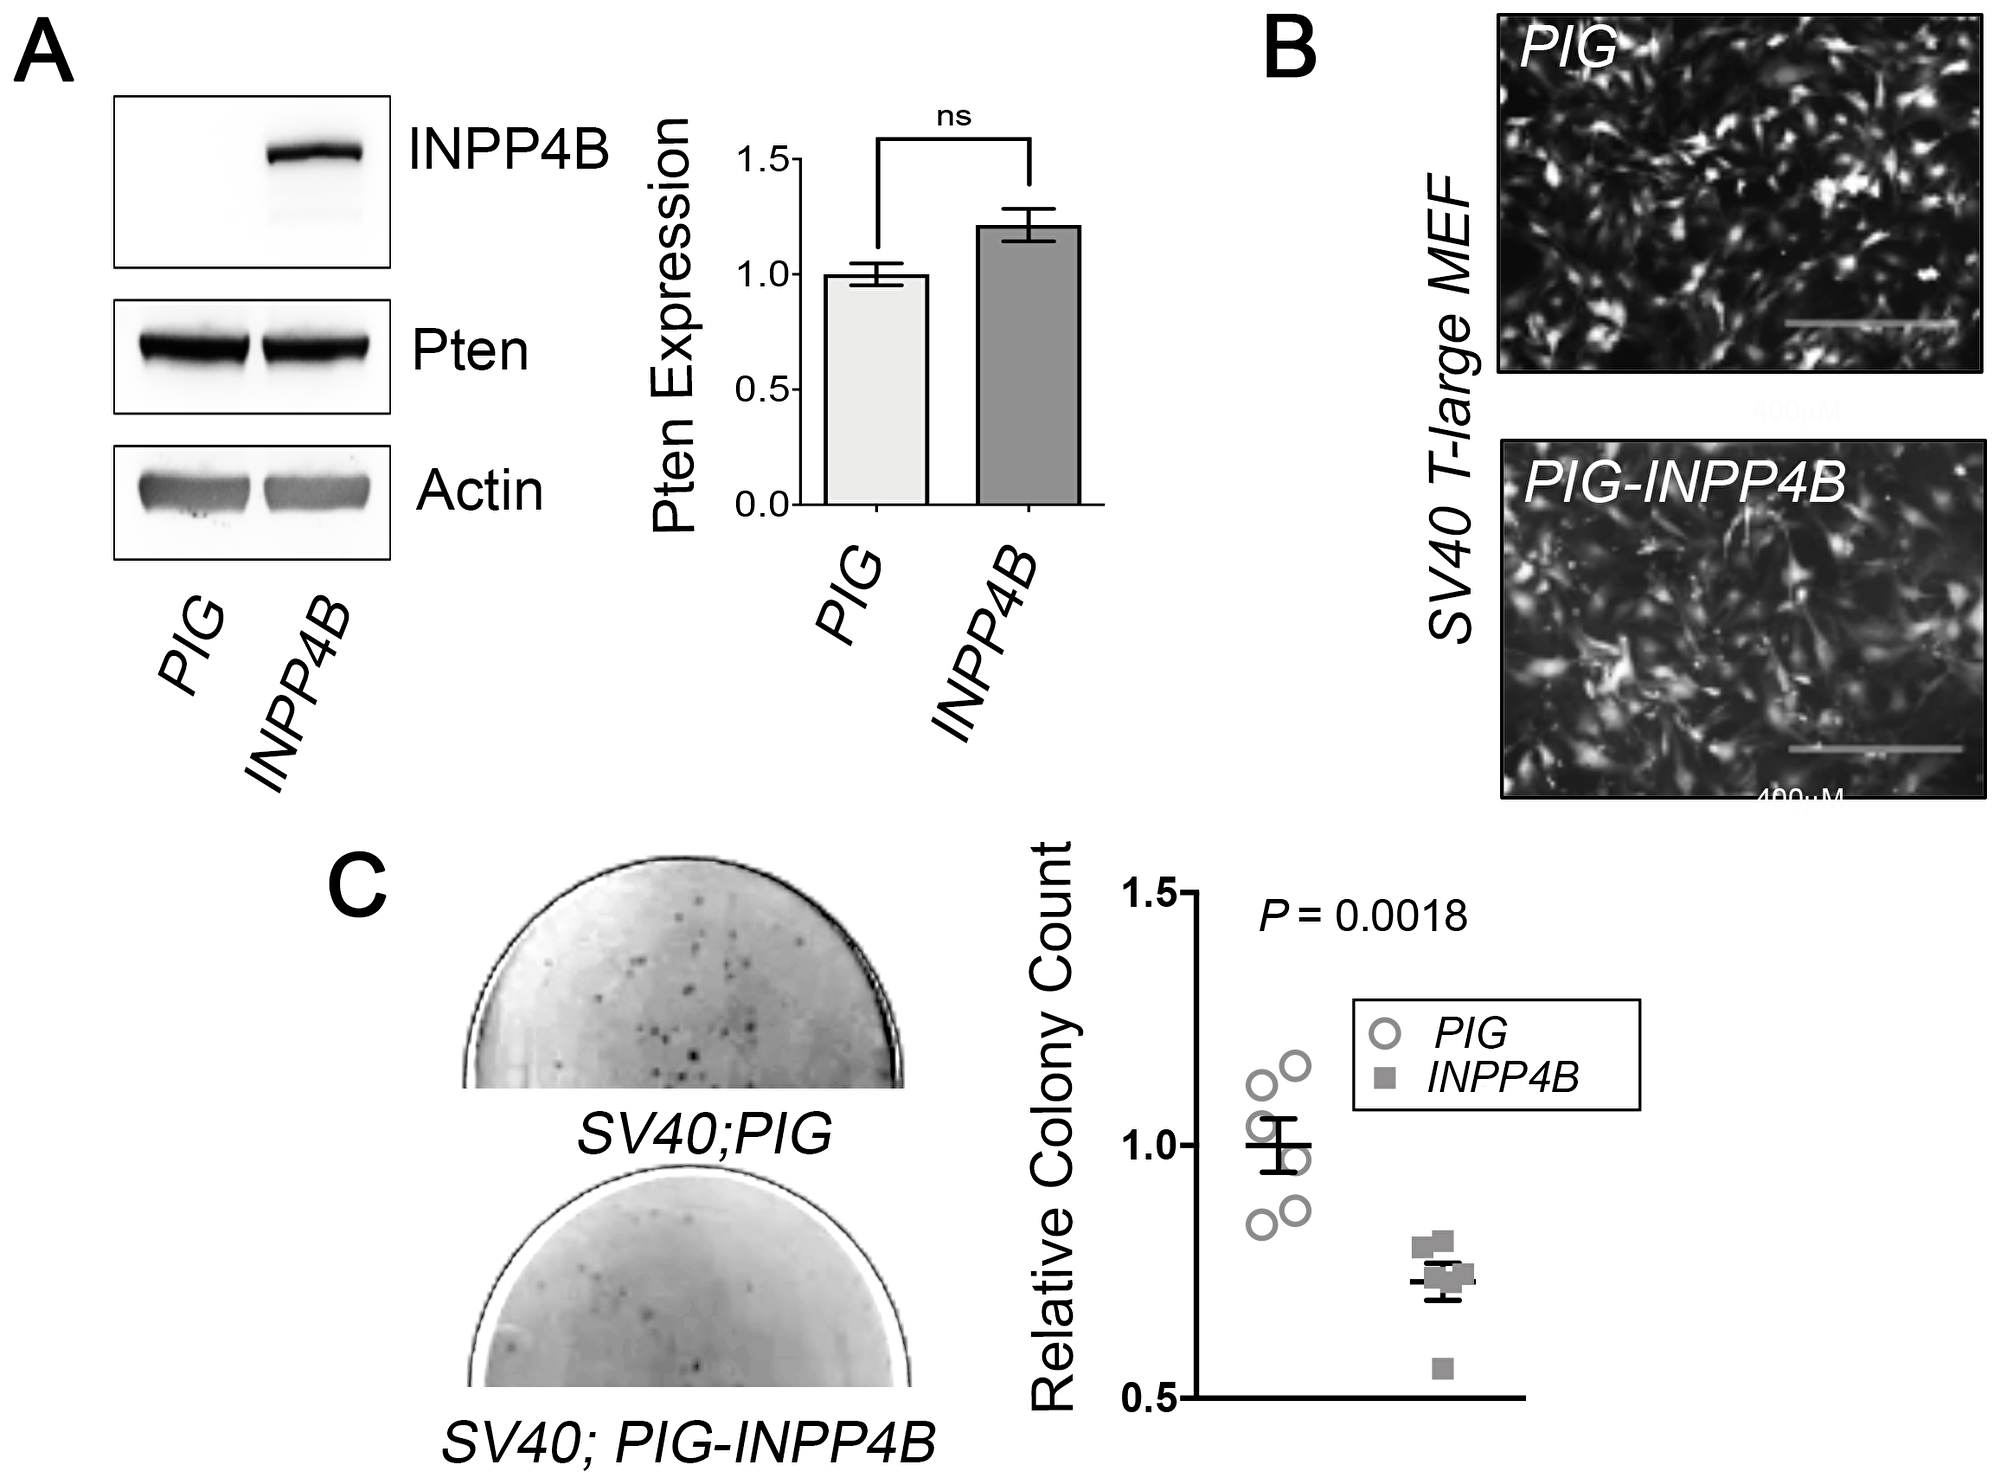 Inpp4b overexpression decreases transformation potential in SV40 T-Large MEF.